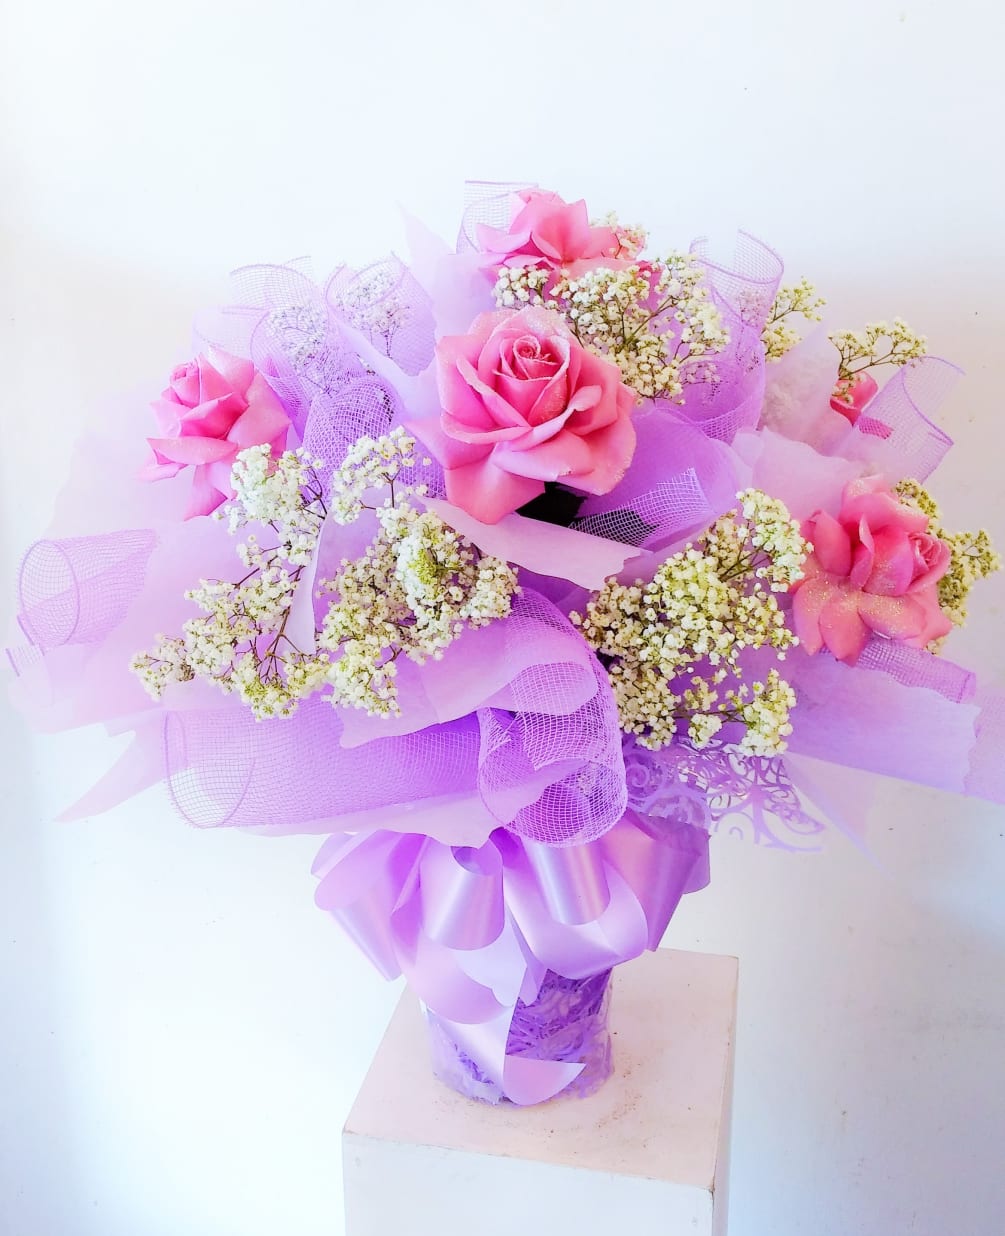 1/2 dozen glittered and bloomed lavender roses wrapped Hong Kong style and